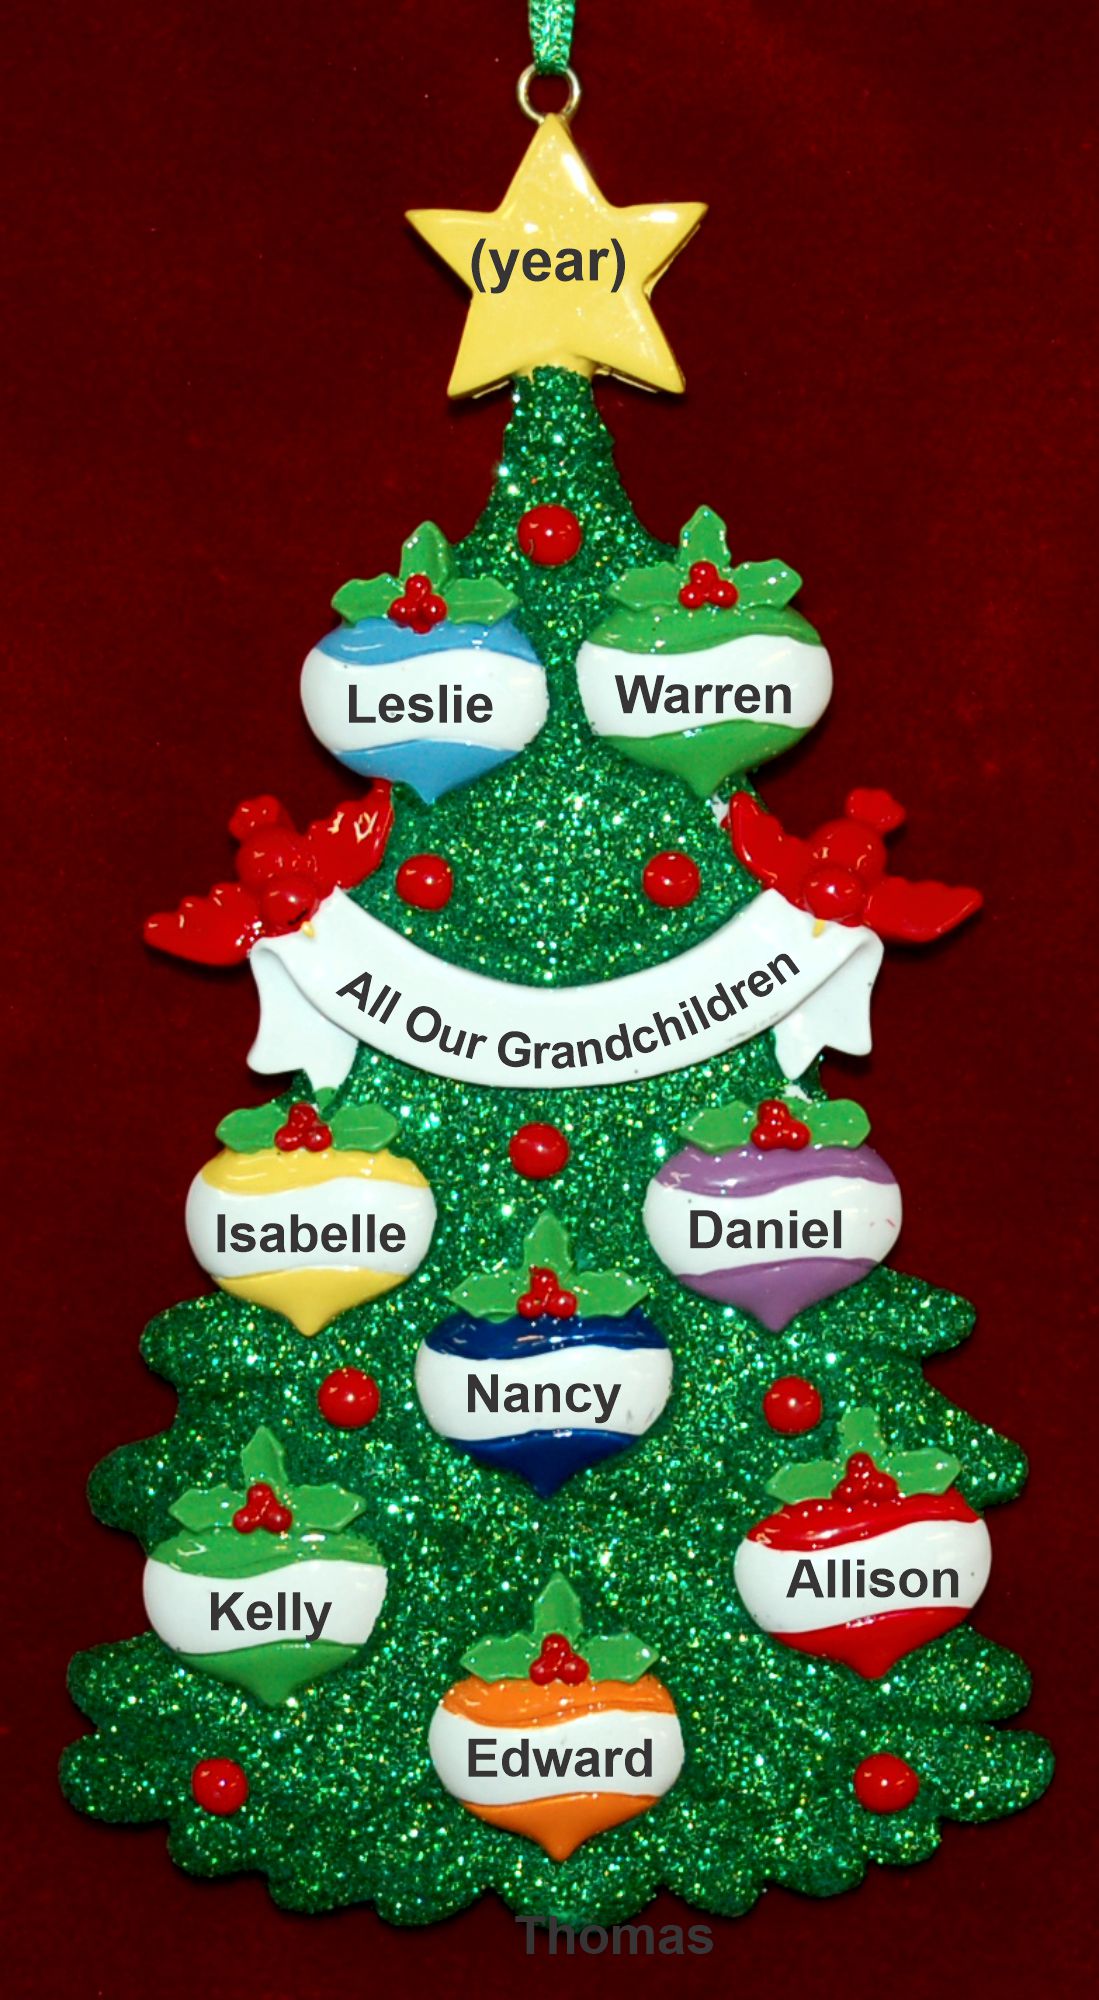 Grandkids Christmas Ornament Xmas Tree for 8 Personalized by RussellRhodes.com